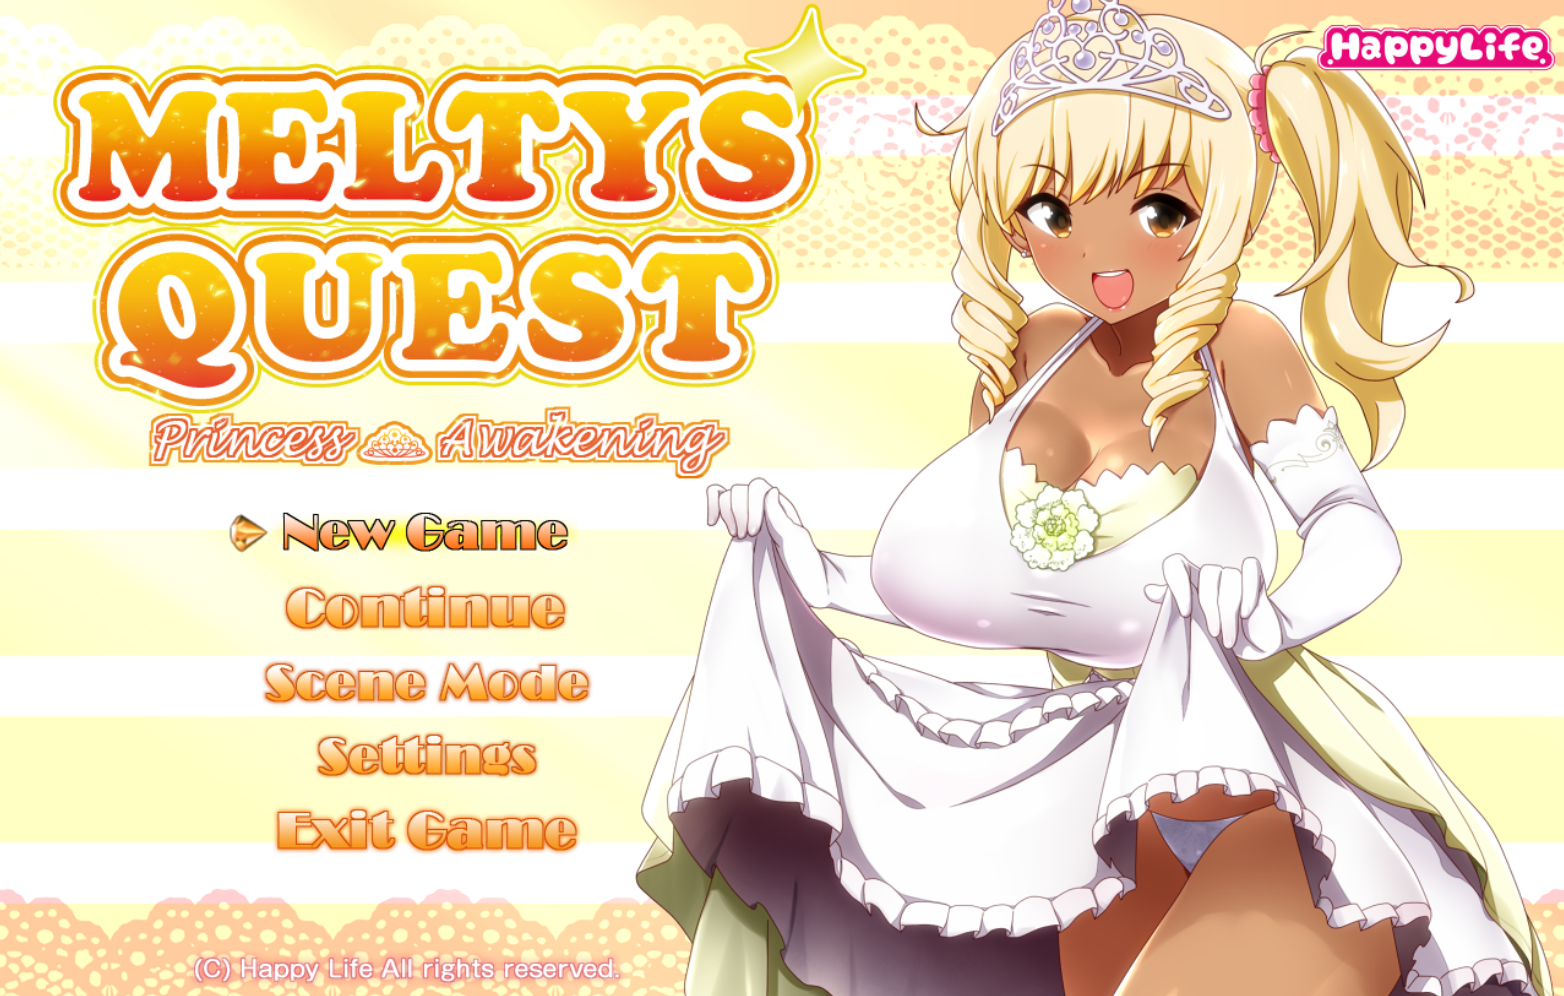 meltys quest save data download